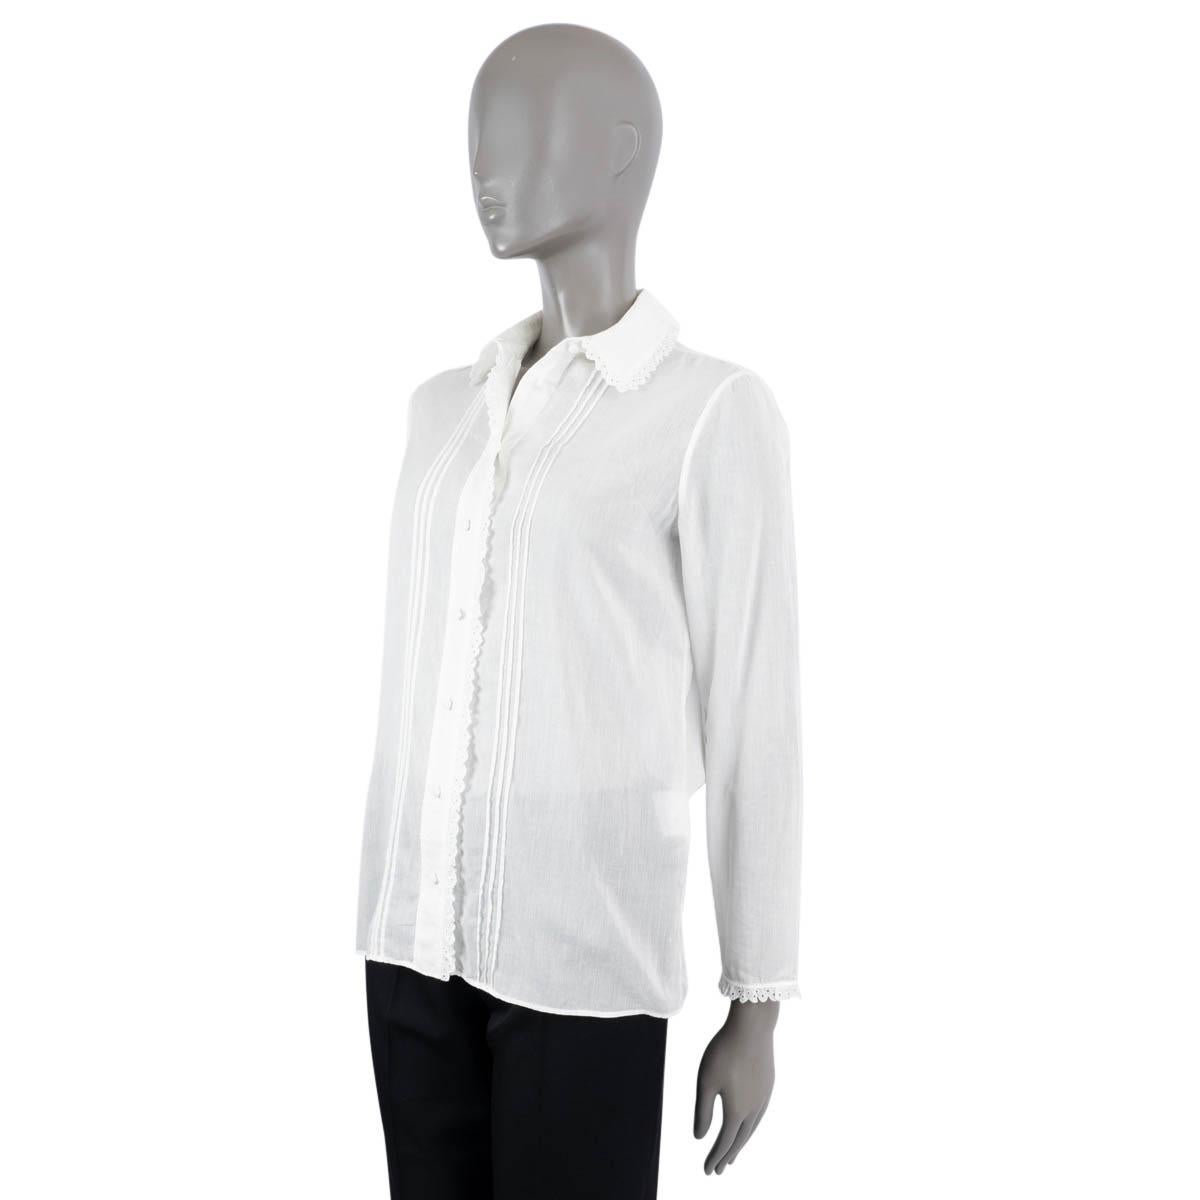 SAINT LAURENT white cotton 2015 BRODERIE ANGLAISE SHEER Blouse Shirt 36 XS In Excellent Condition For Sale In Zürich, CH